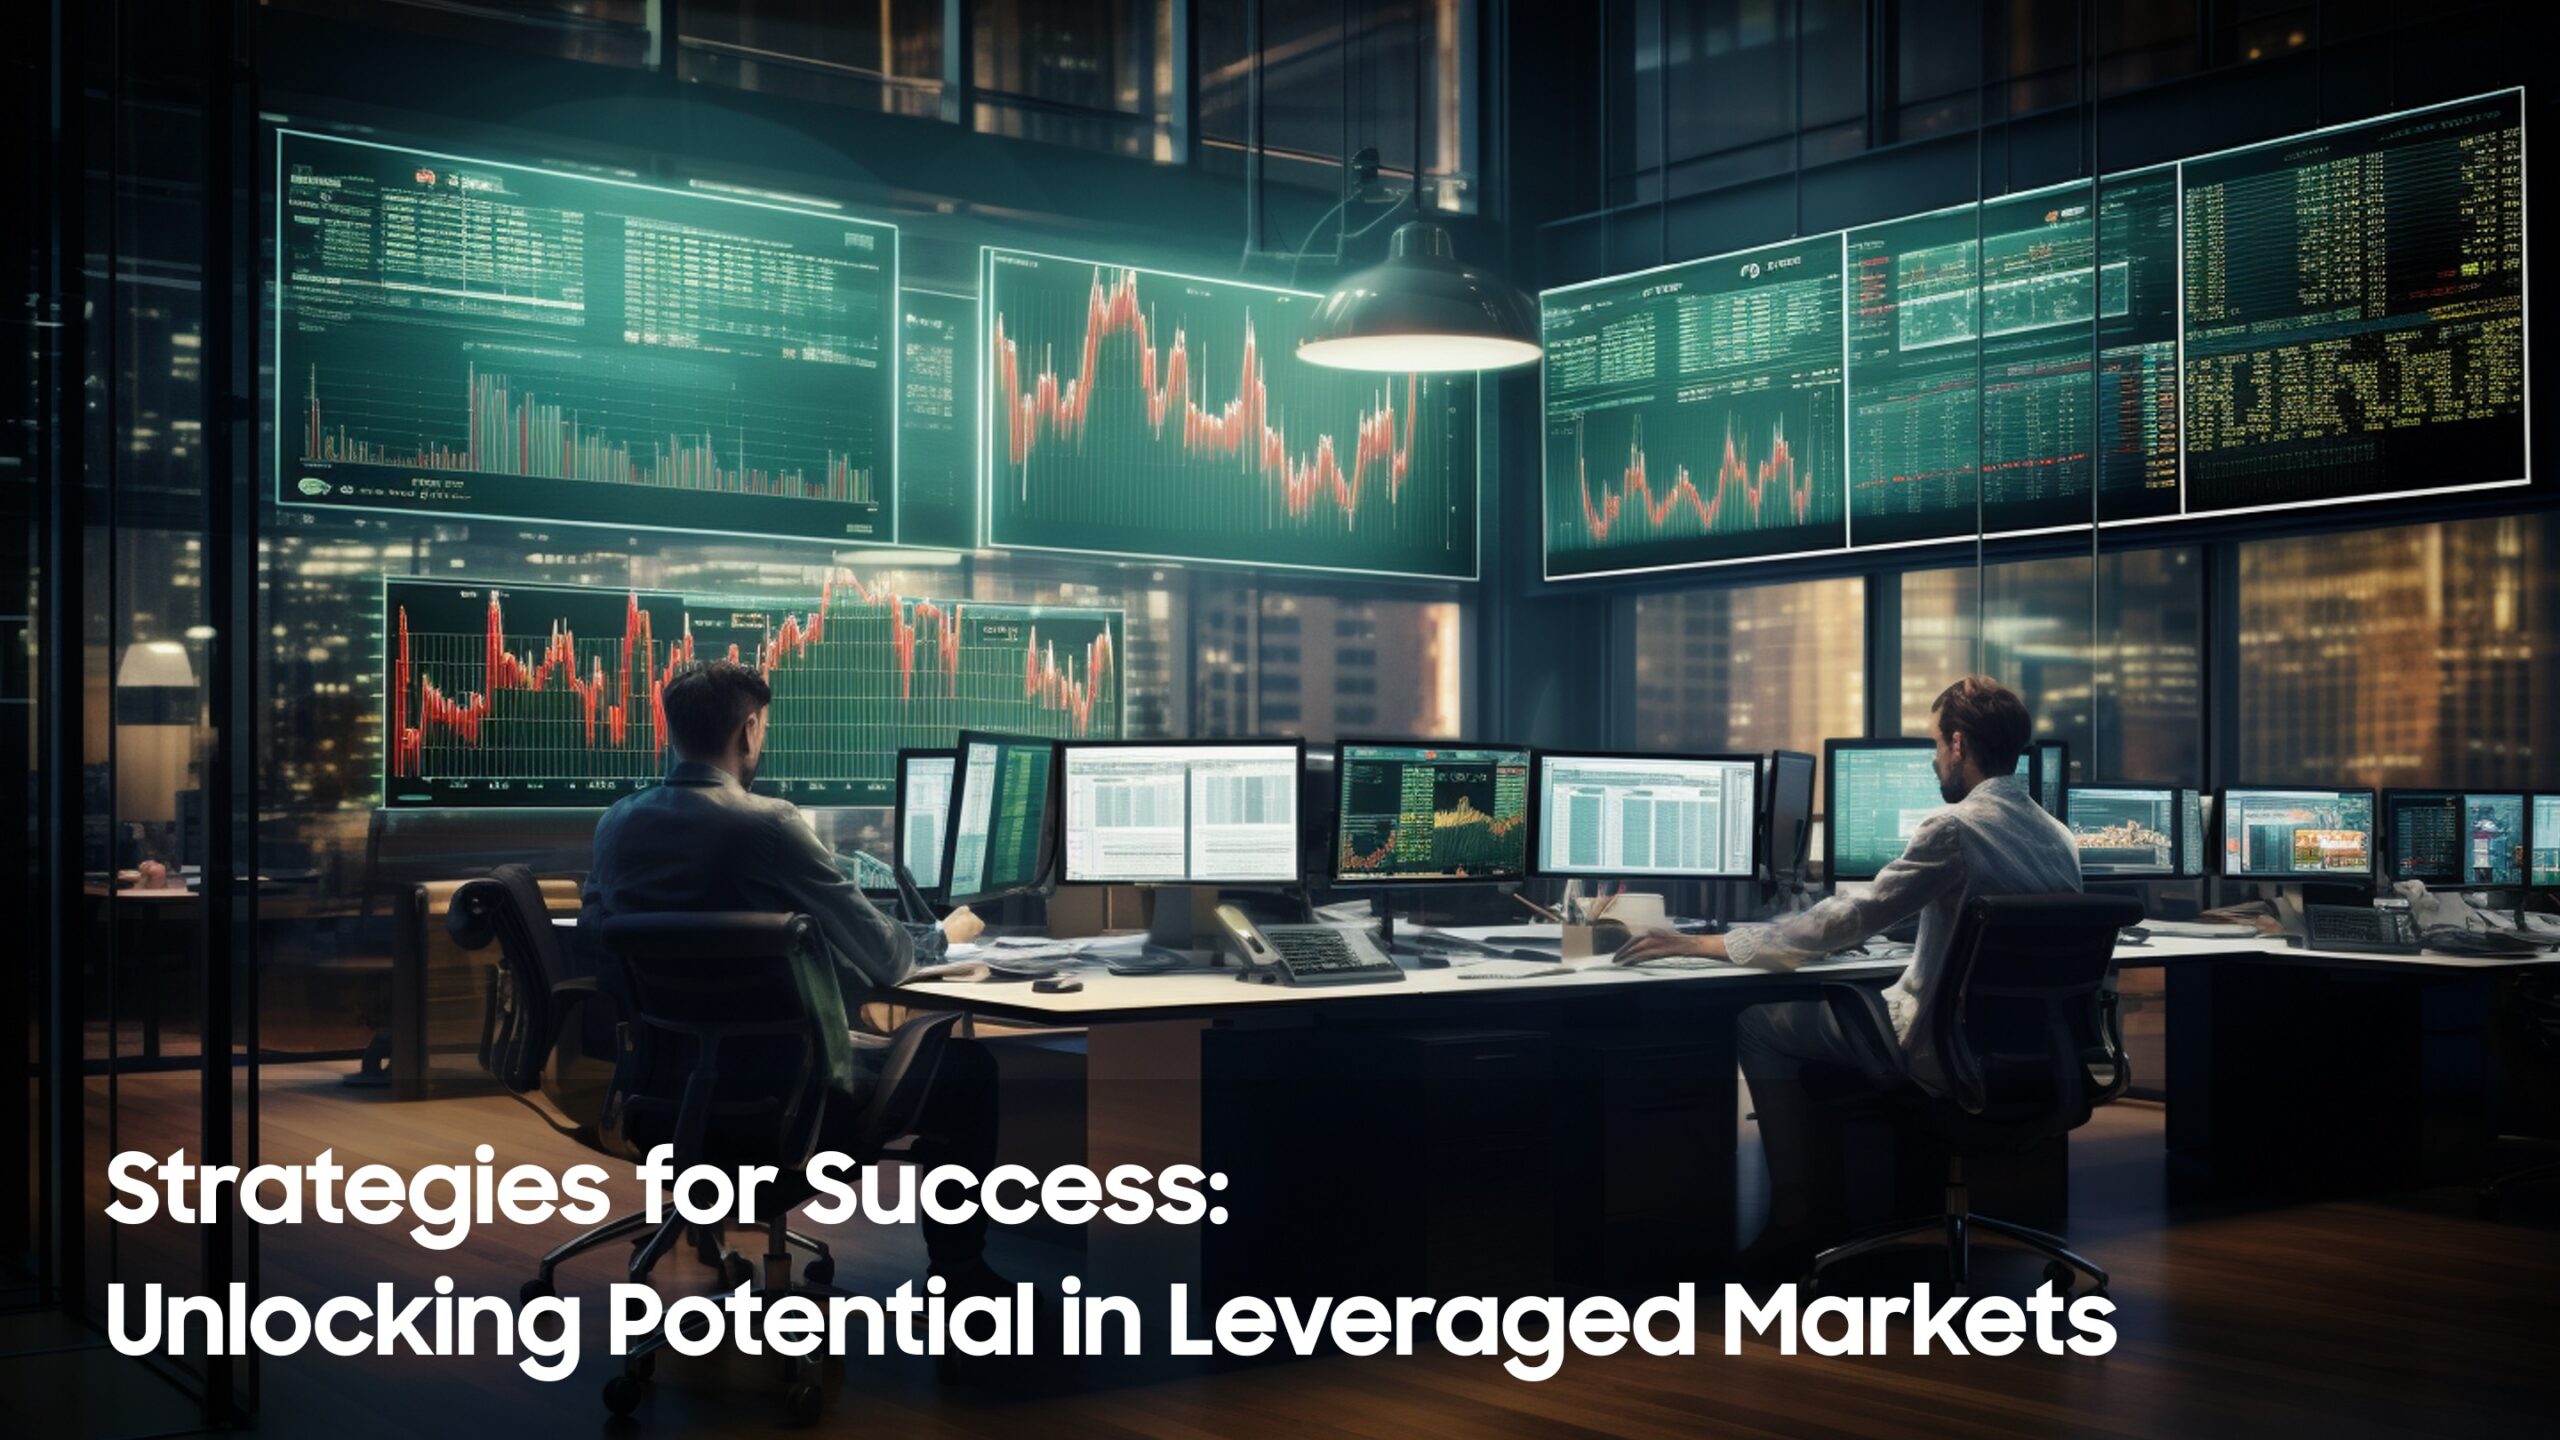 Strategies for Success: Unlocking Potential in Leveraged Markets